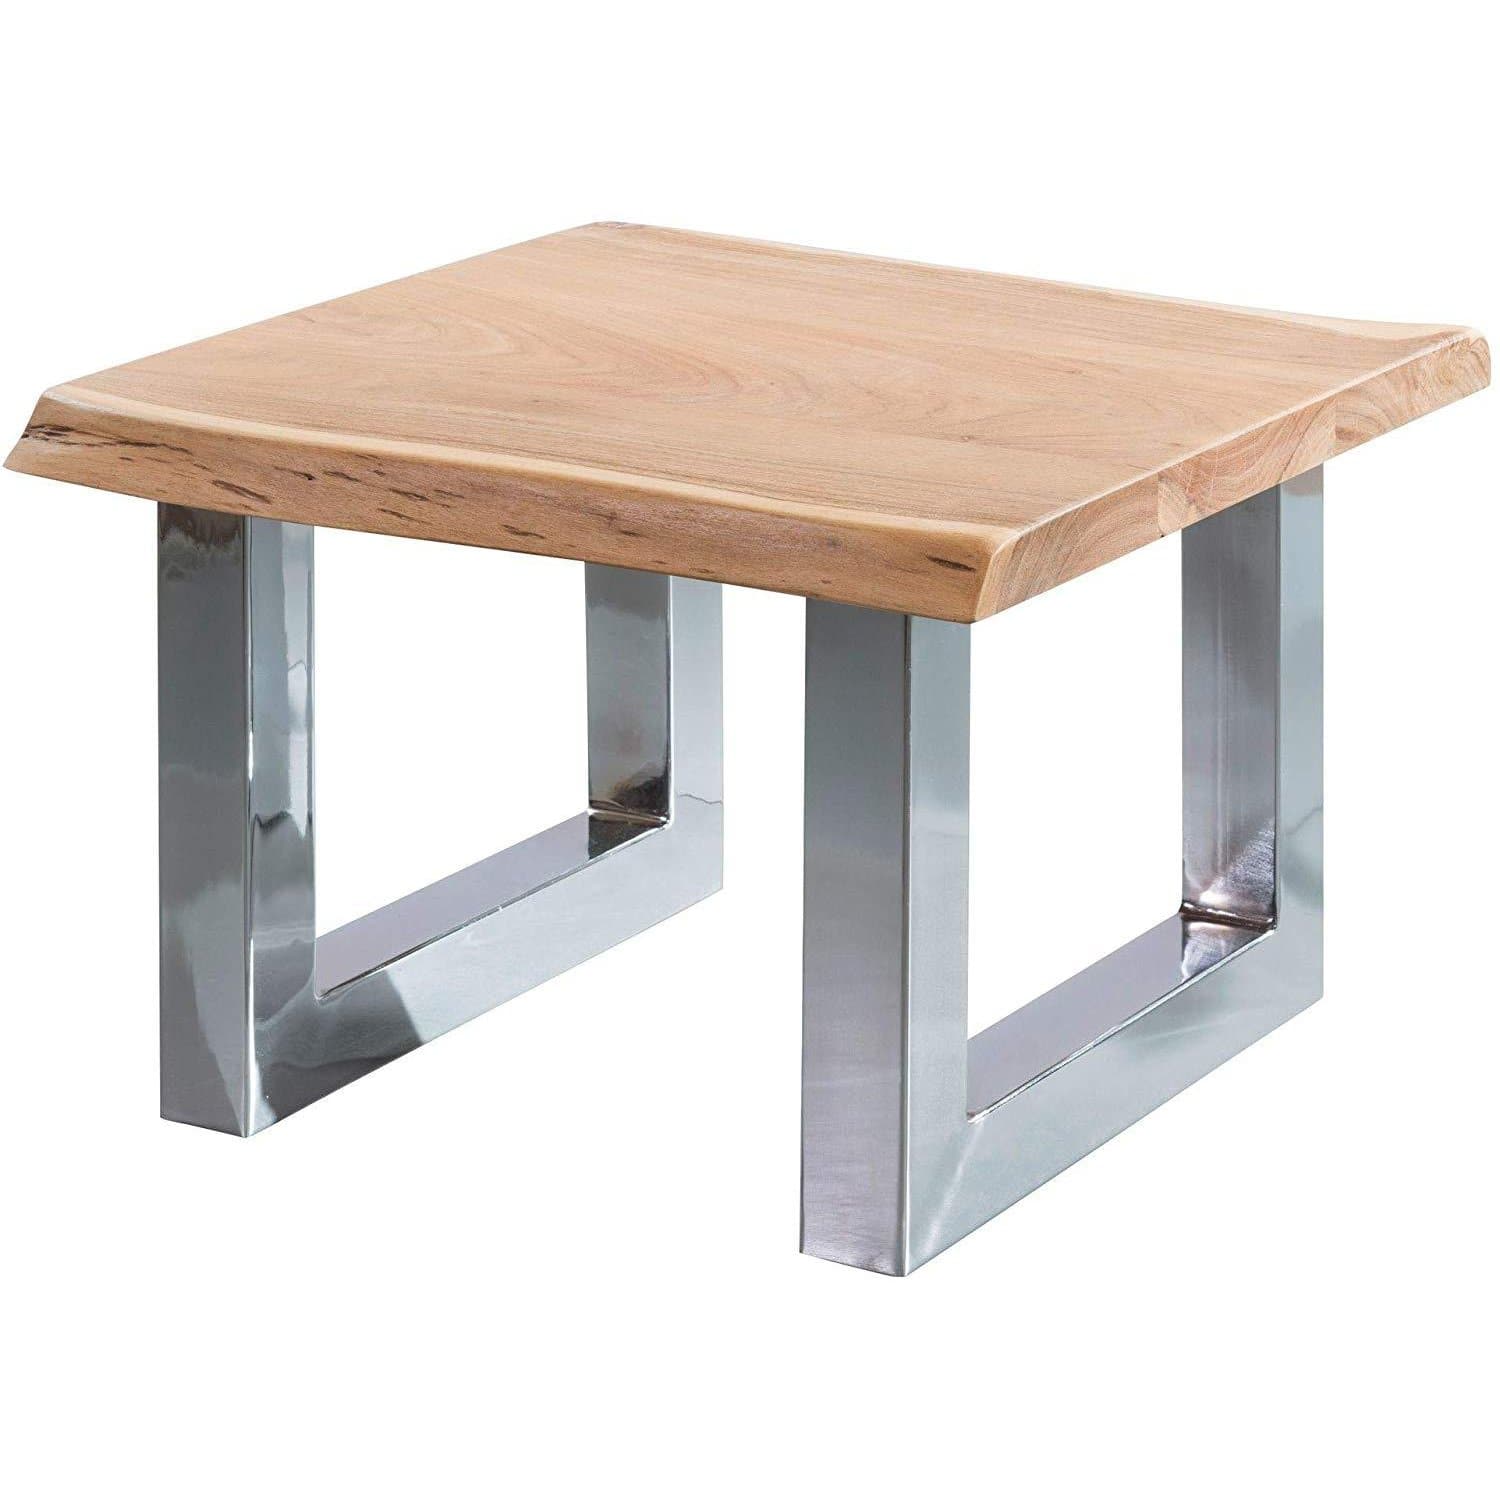 Nancy's Coffee Table - Side Table - Solid Wood - 58 x 40 x 60 cm